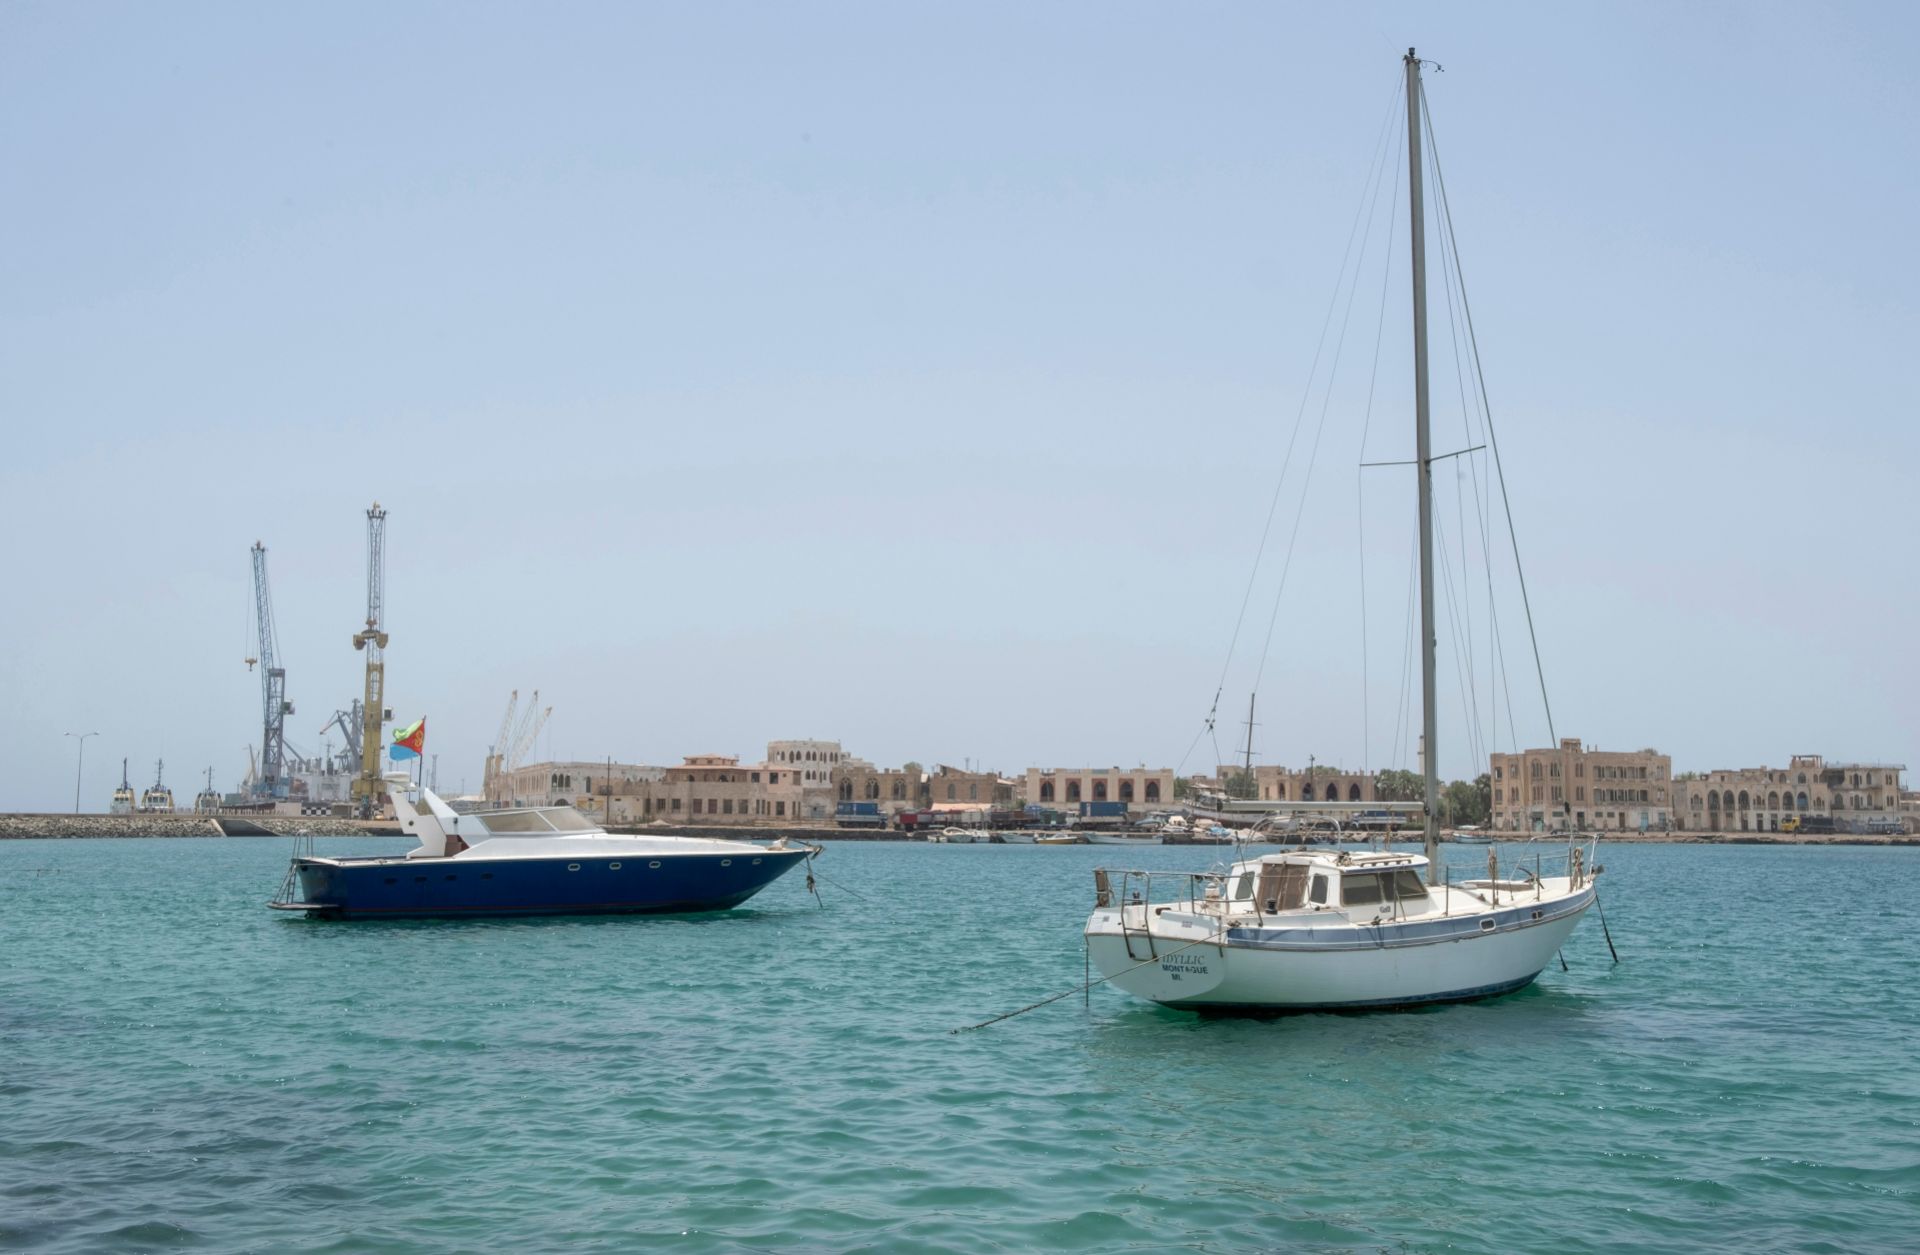 The harbor in Massawa shows some of what Eritrea has to offer to investors as a transportation hub and tourism magnet.